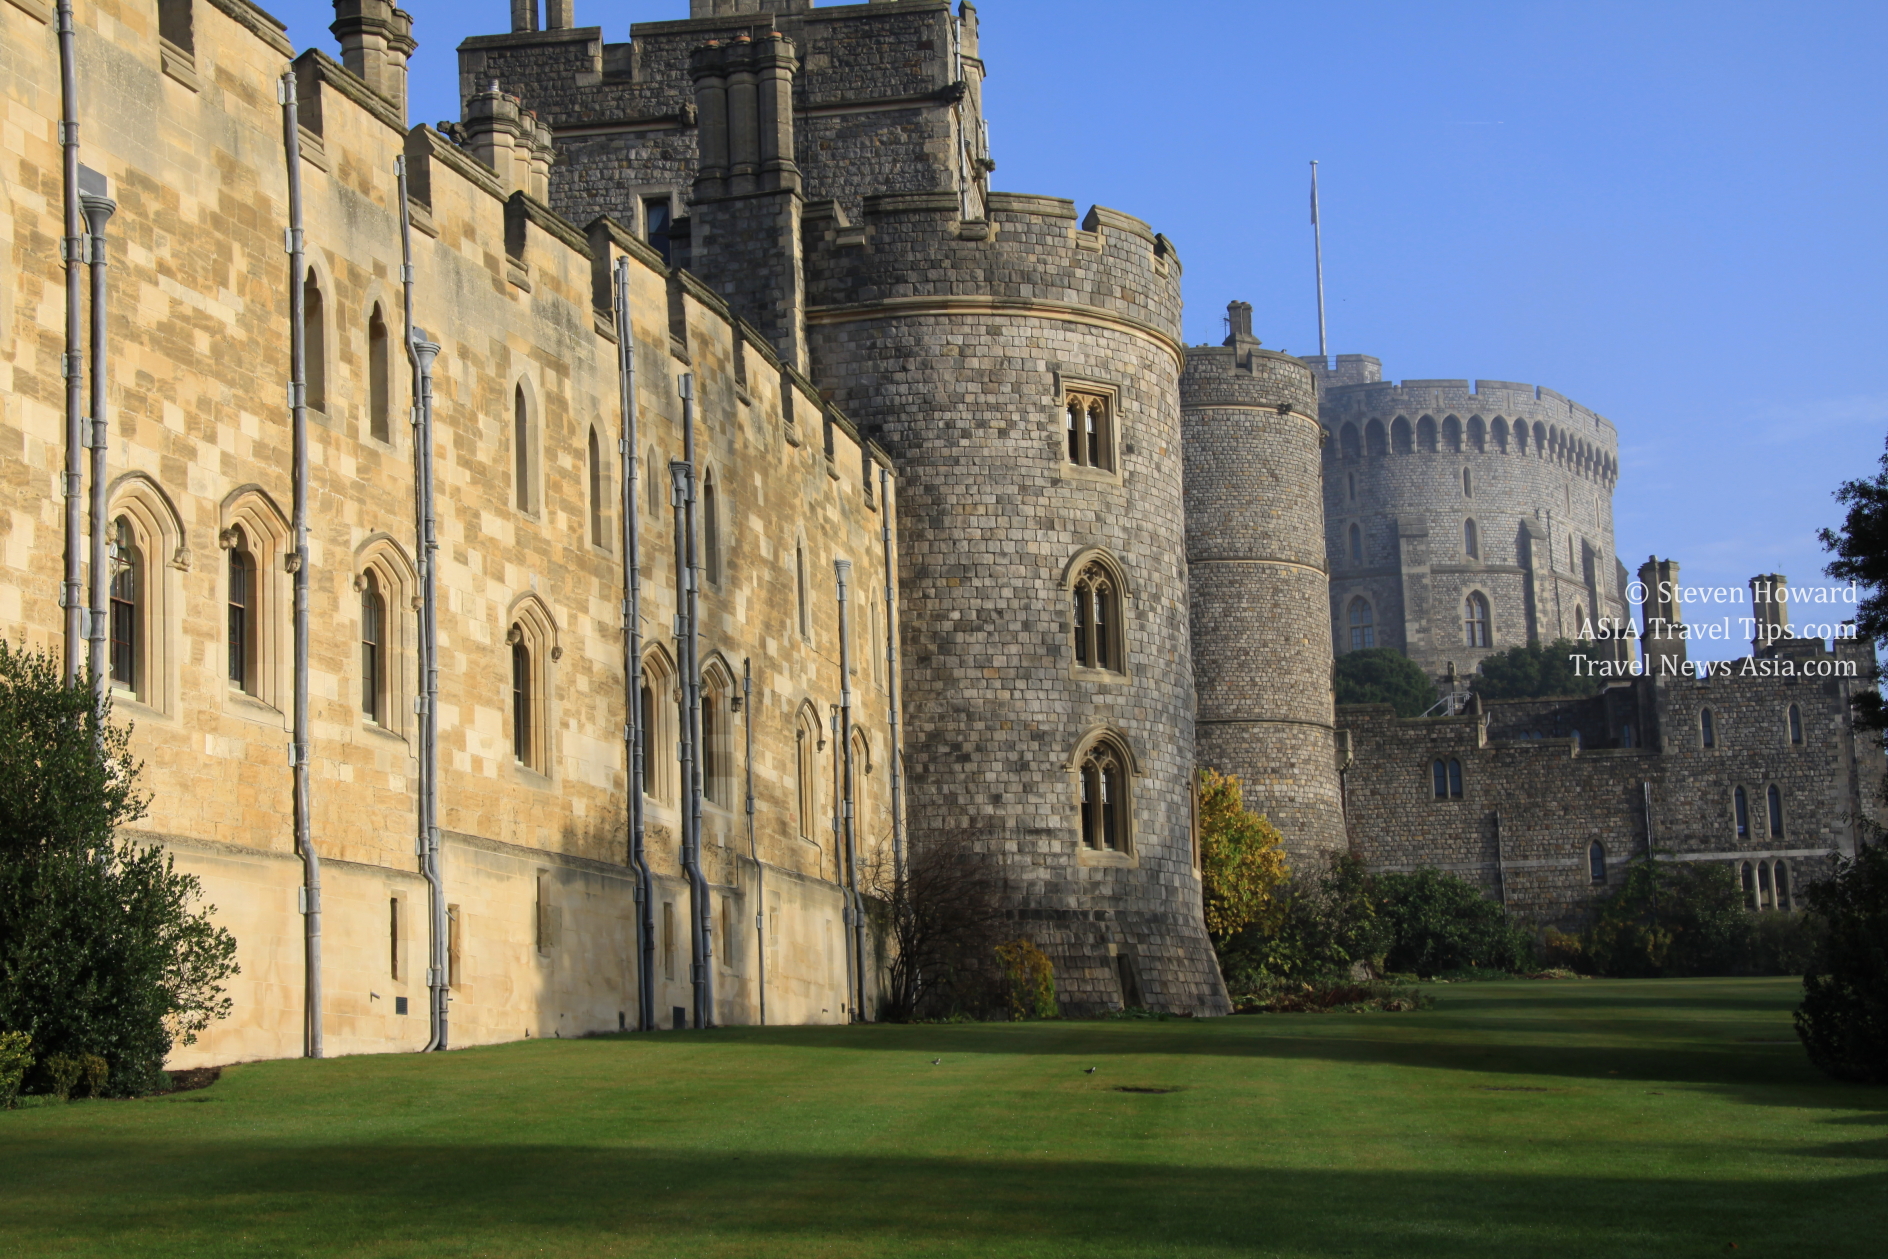 Windsor Castle in England. Picture by Steven Howard of TravelNewsAsia.com Click to enlarge.